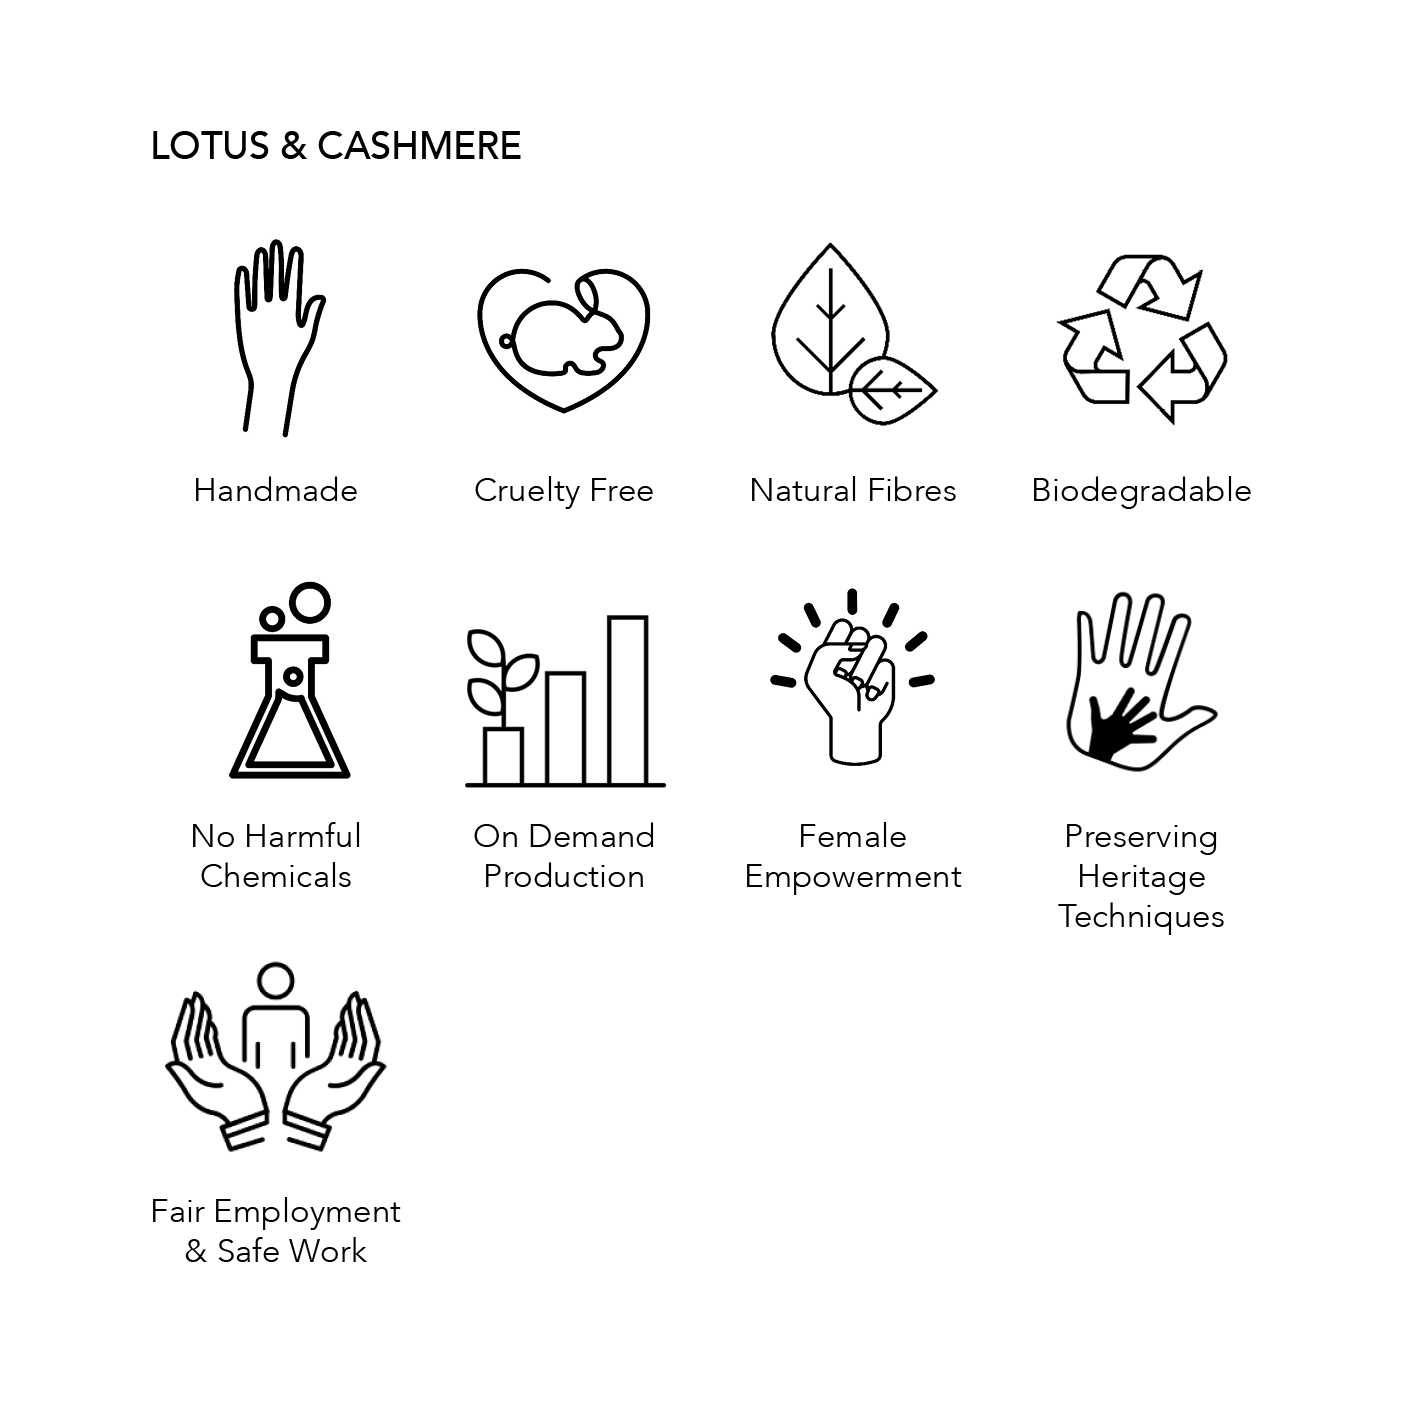 Lotus & Cashmere Sustainability Credentials; handmade, cruelty free, natural fibres, biodegradable, no harmful chemicals, on demand production, female empowerment, preserving heritage techniques, fair employment and safe work